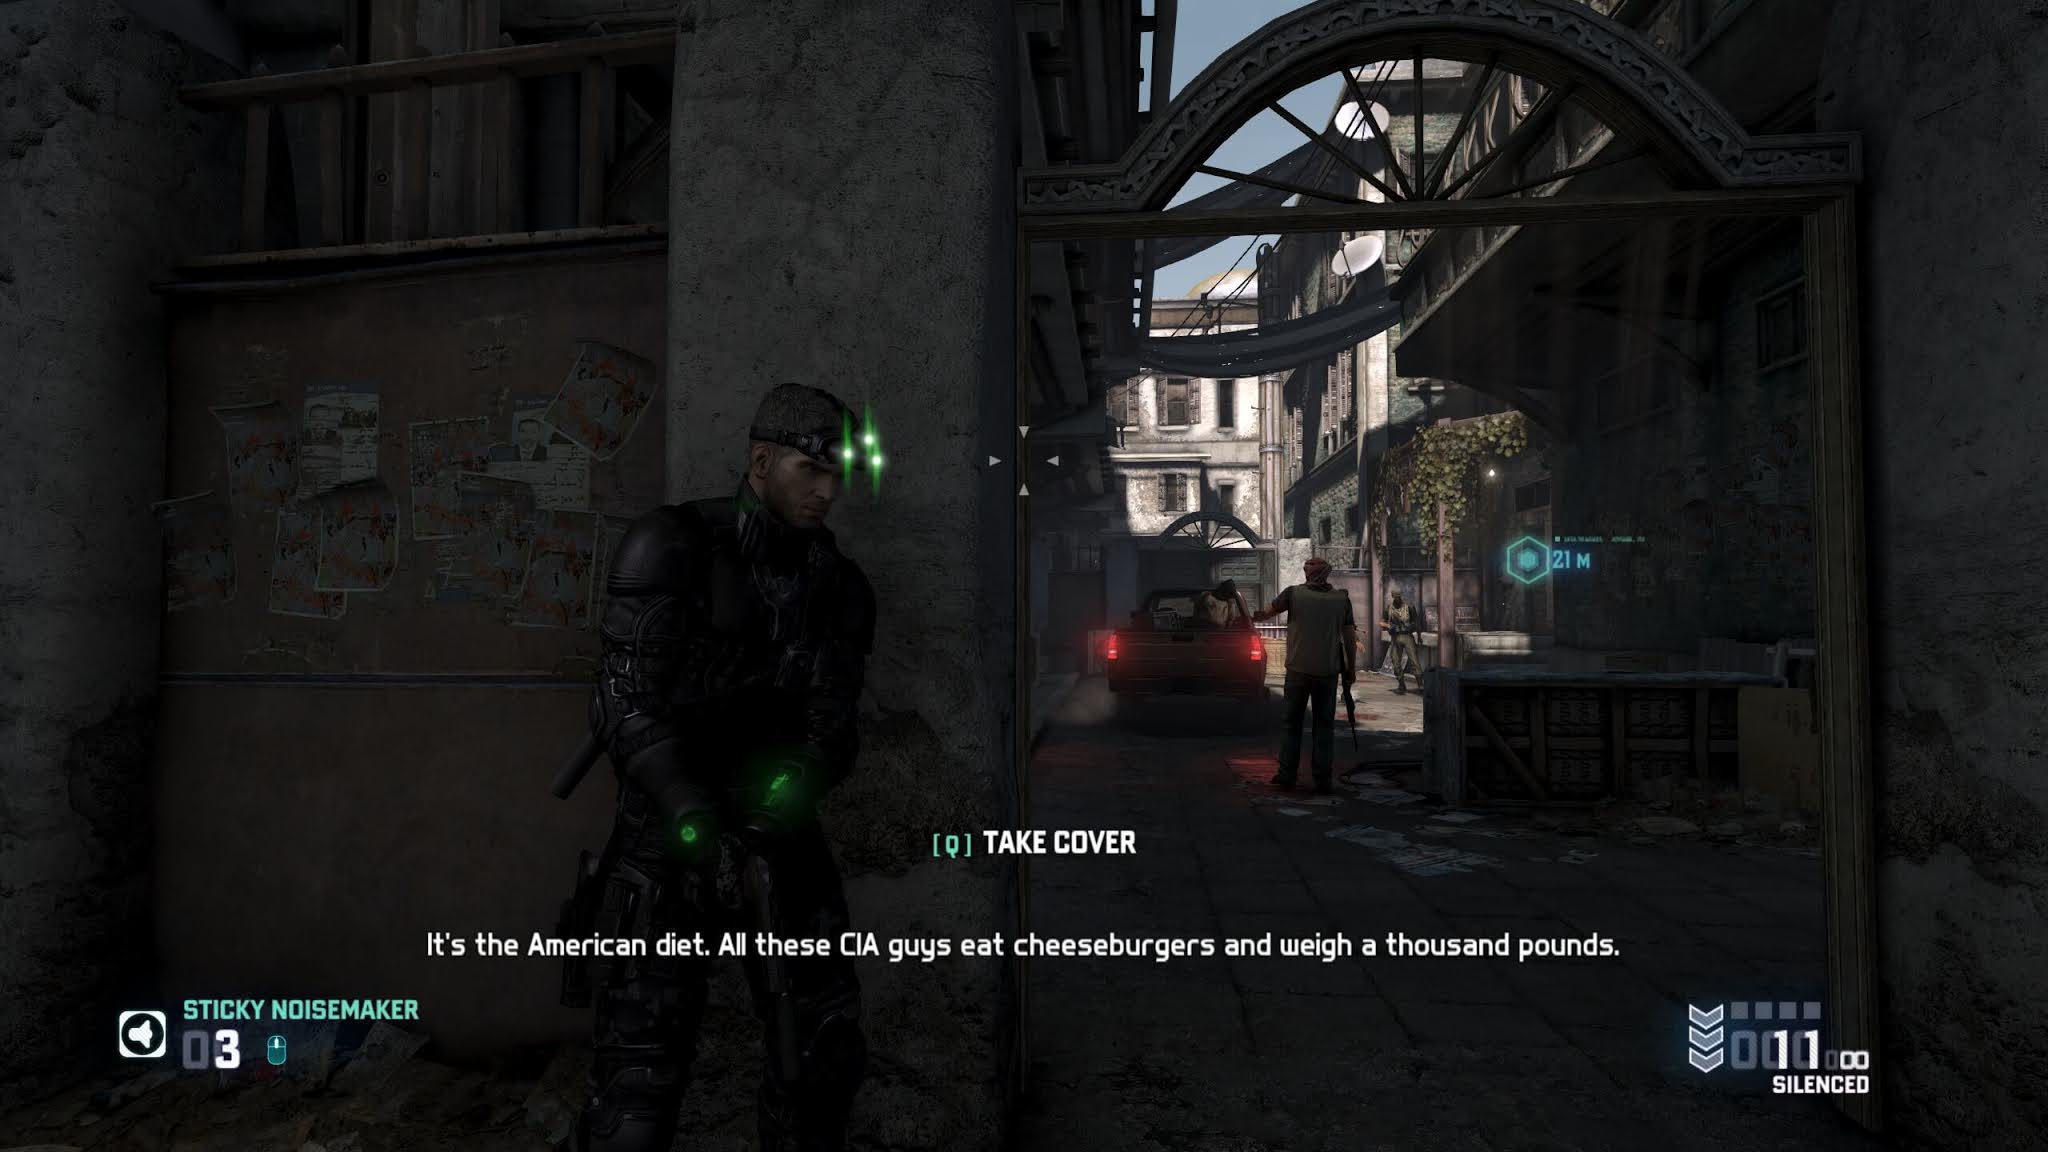 Tom Clancy's Splinter Cell : Blacklist Highly Compressed for PC in 800 MB Parts - TraX Gaming Center